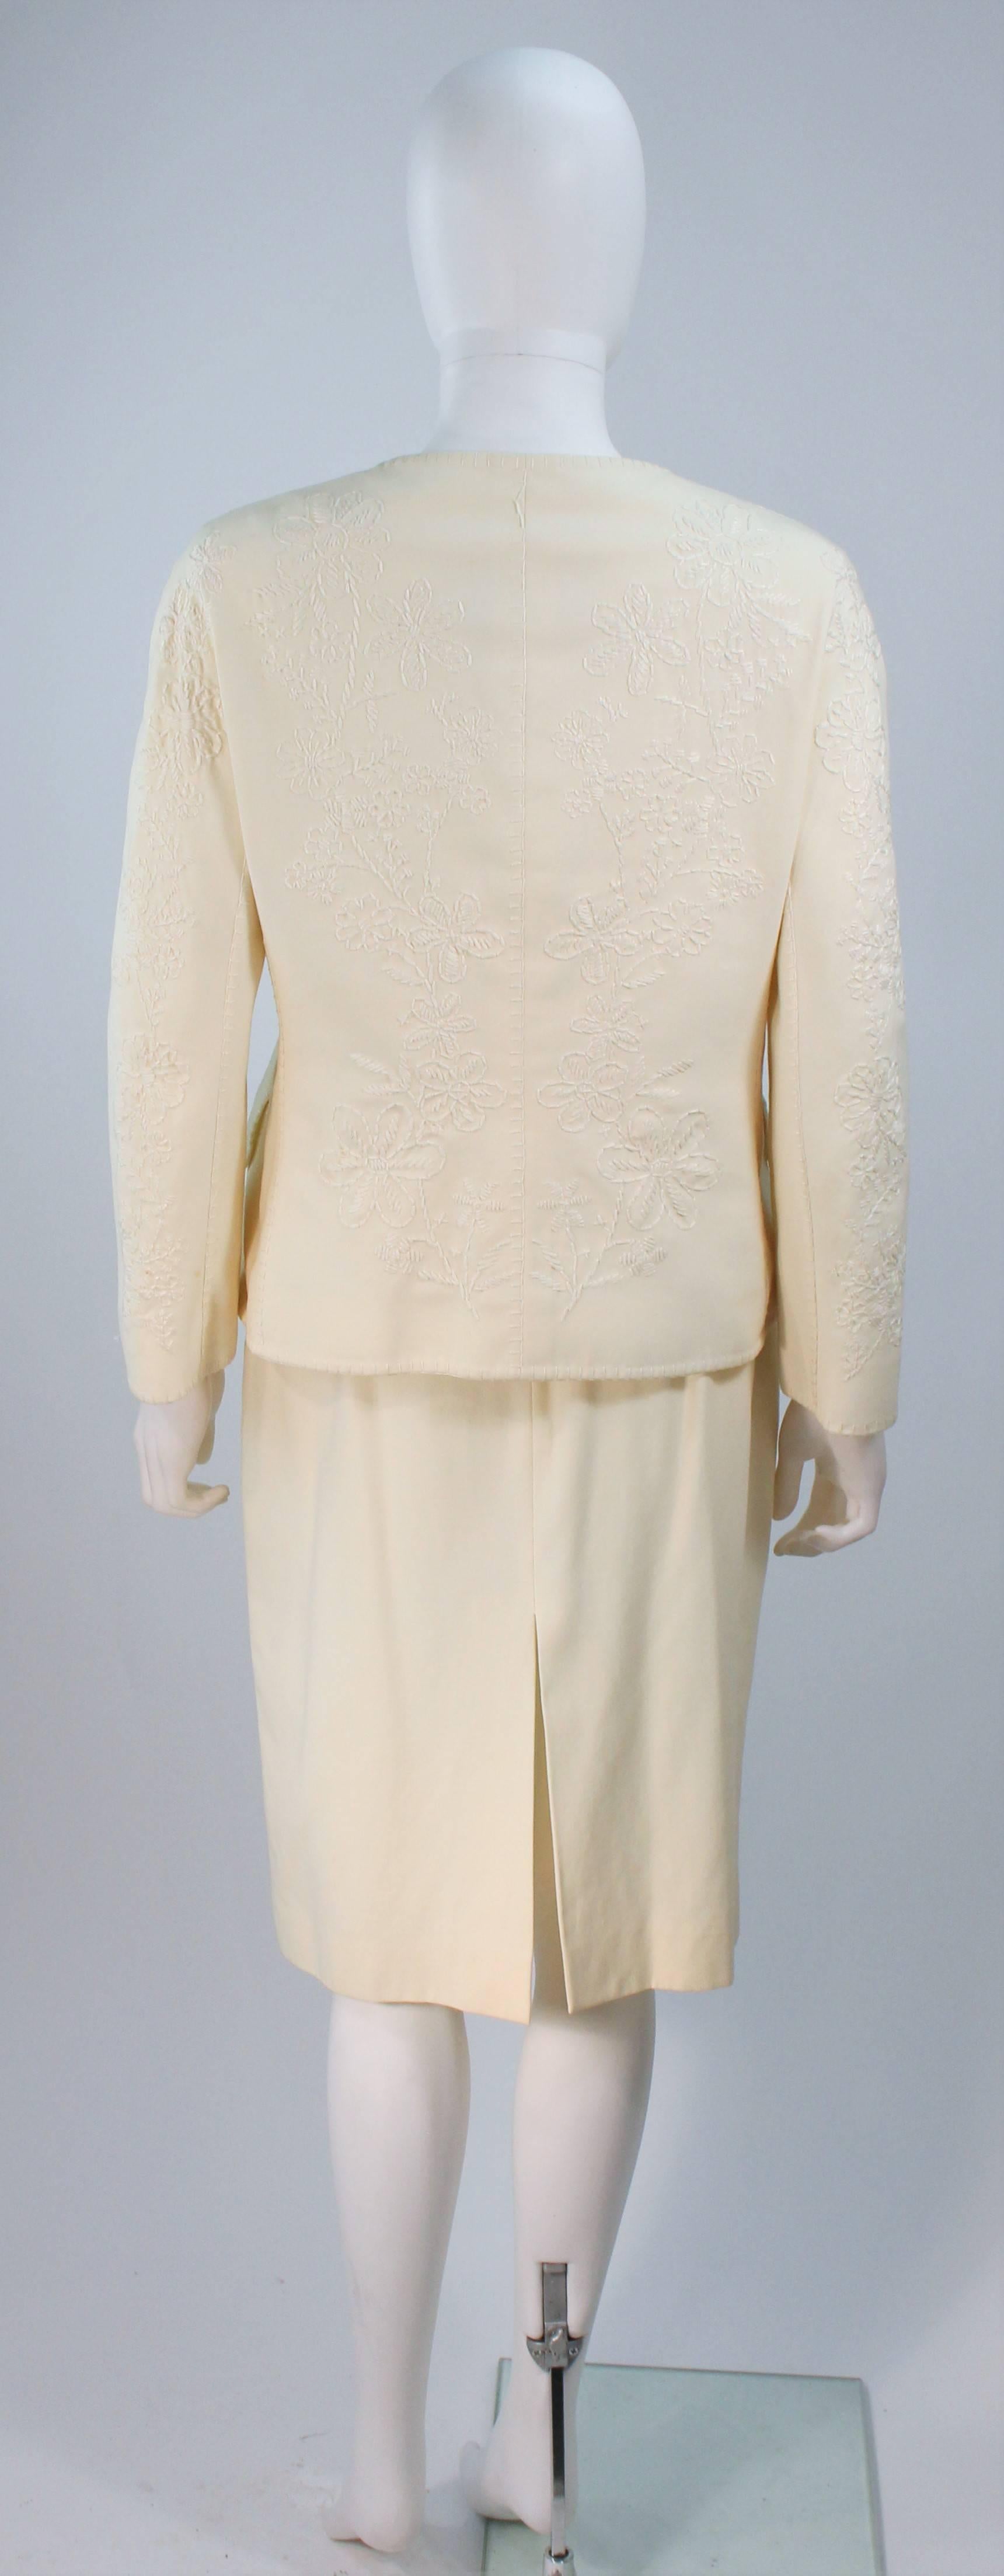 MOSCHINO Off White Embroidered Stretch Skirt Suit Size 12 In Excellent Condition For Sale In Los Angeles, CA